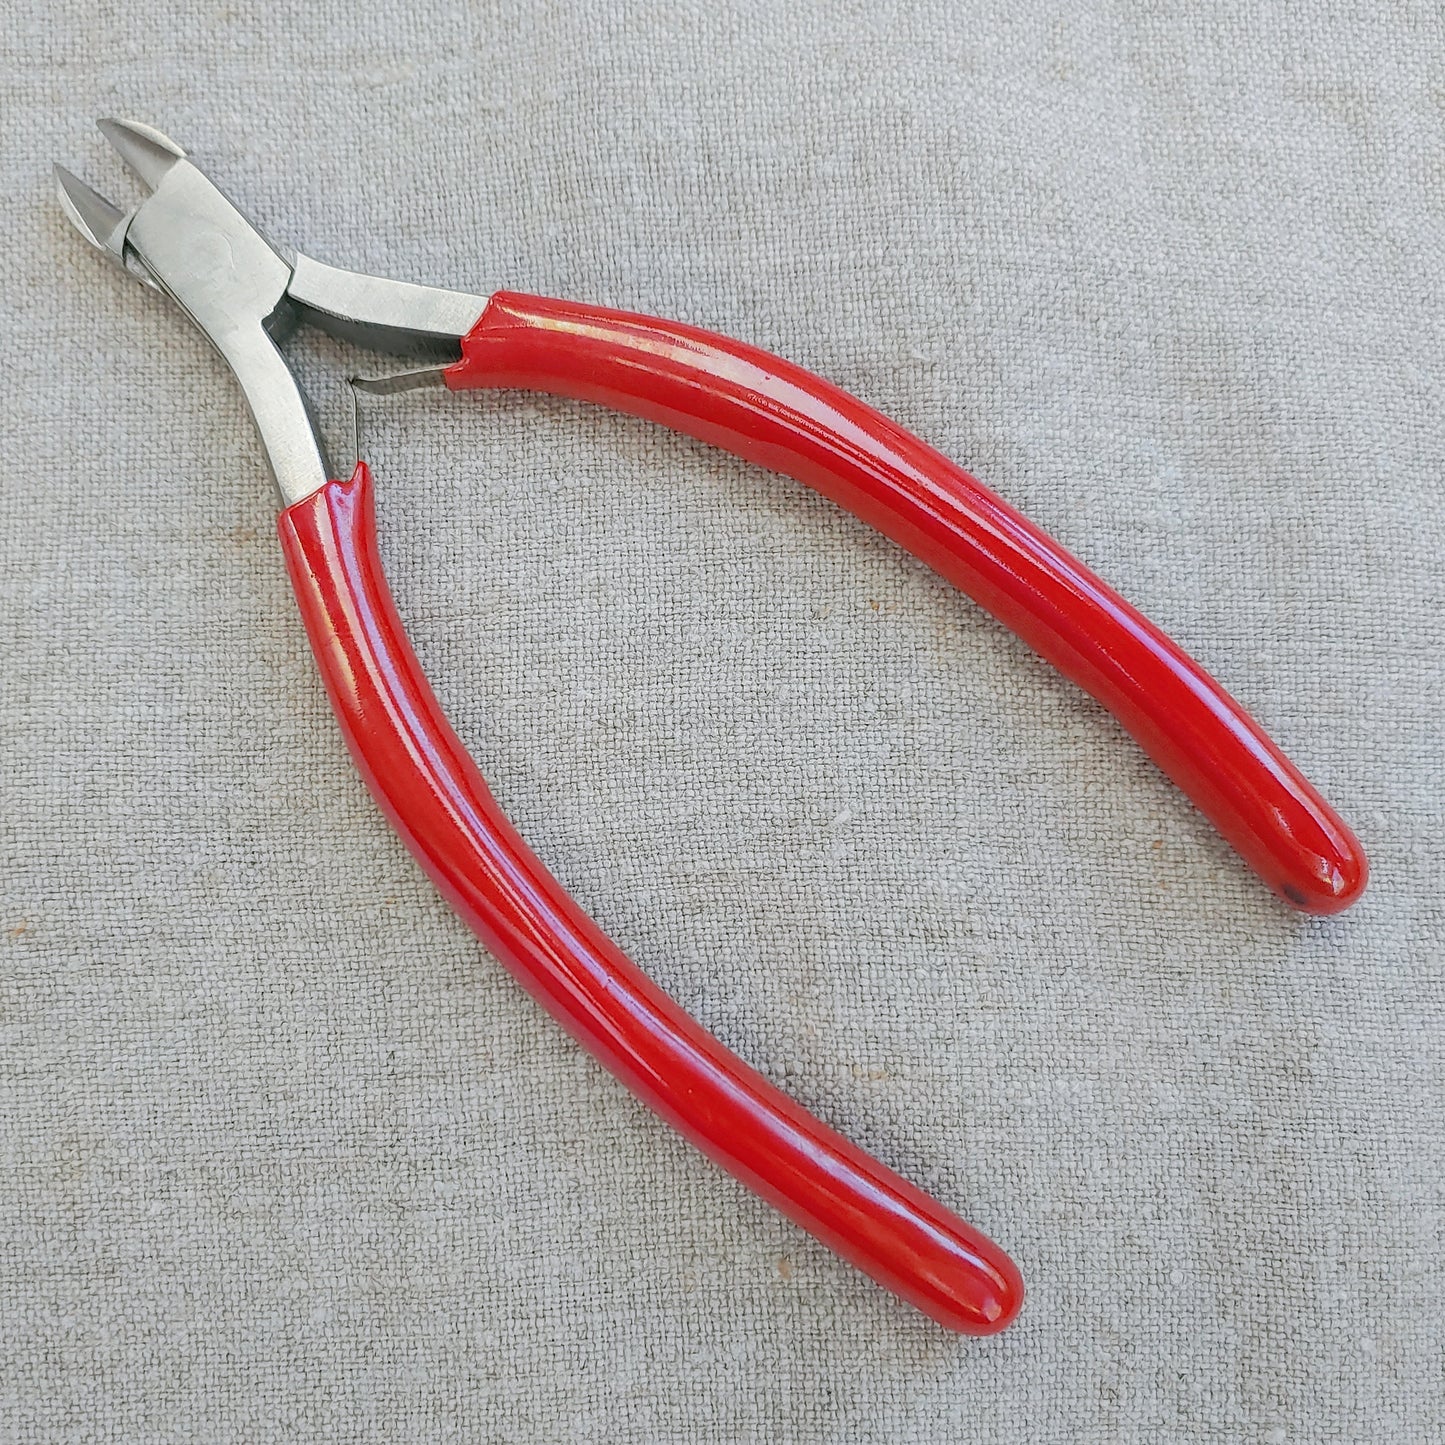 Eurotool Red Pliers and Cutters